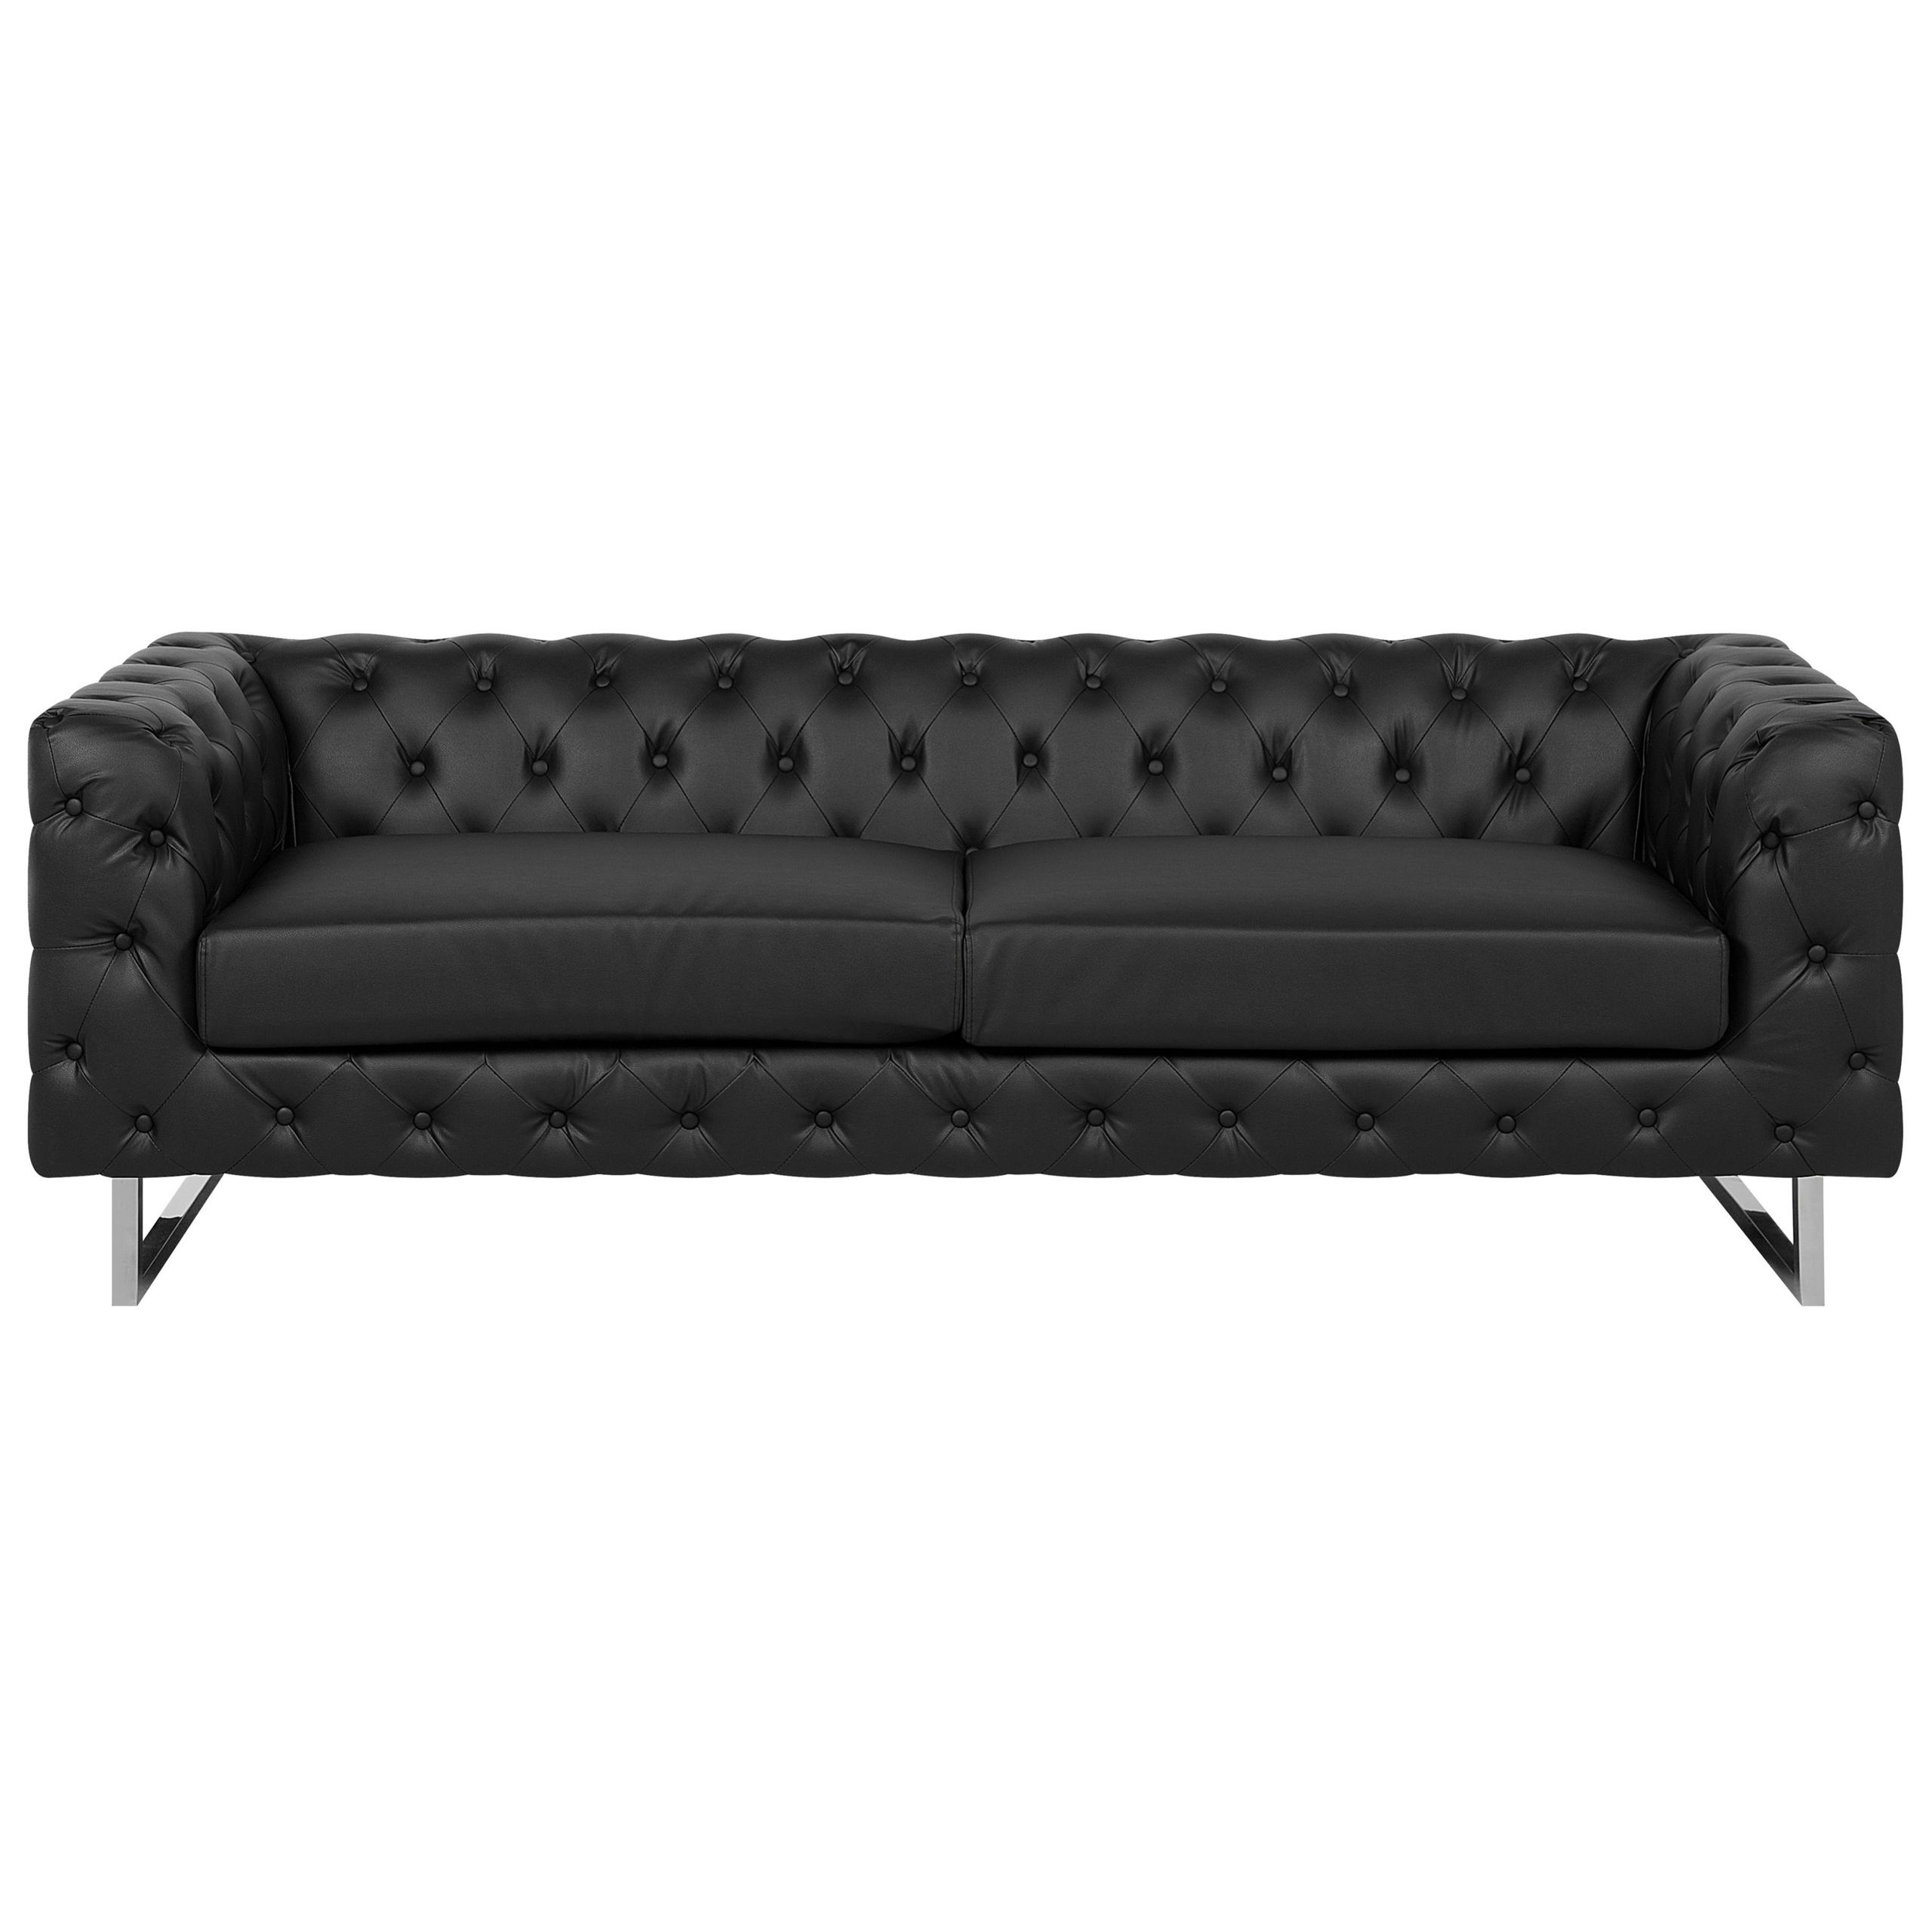 Beliani 3 Seater Chesterfield Style Sofa Black Tuxedo Arms Buttoned Back Silver Legs Faux Leather